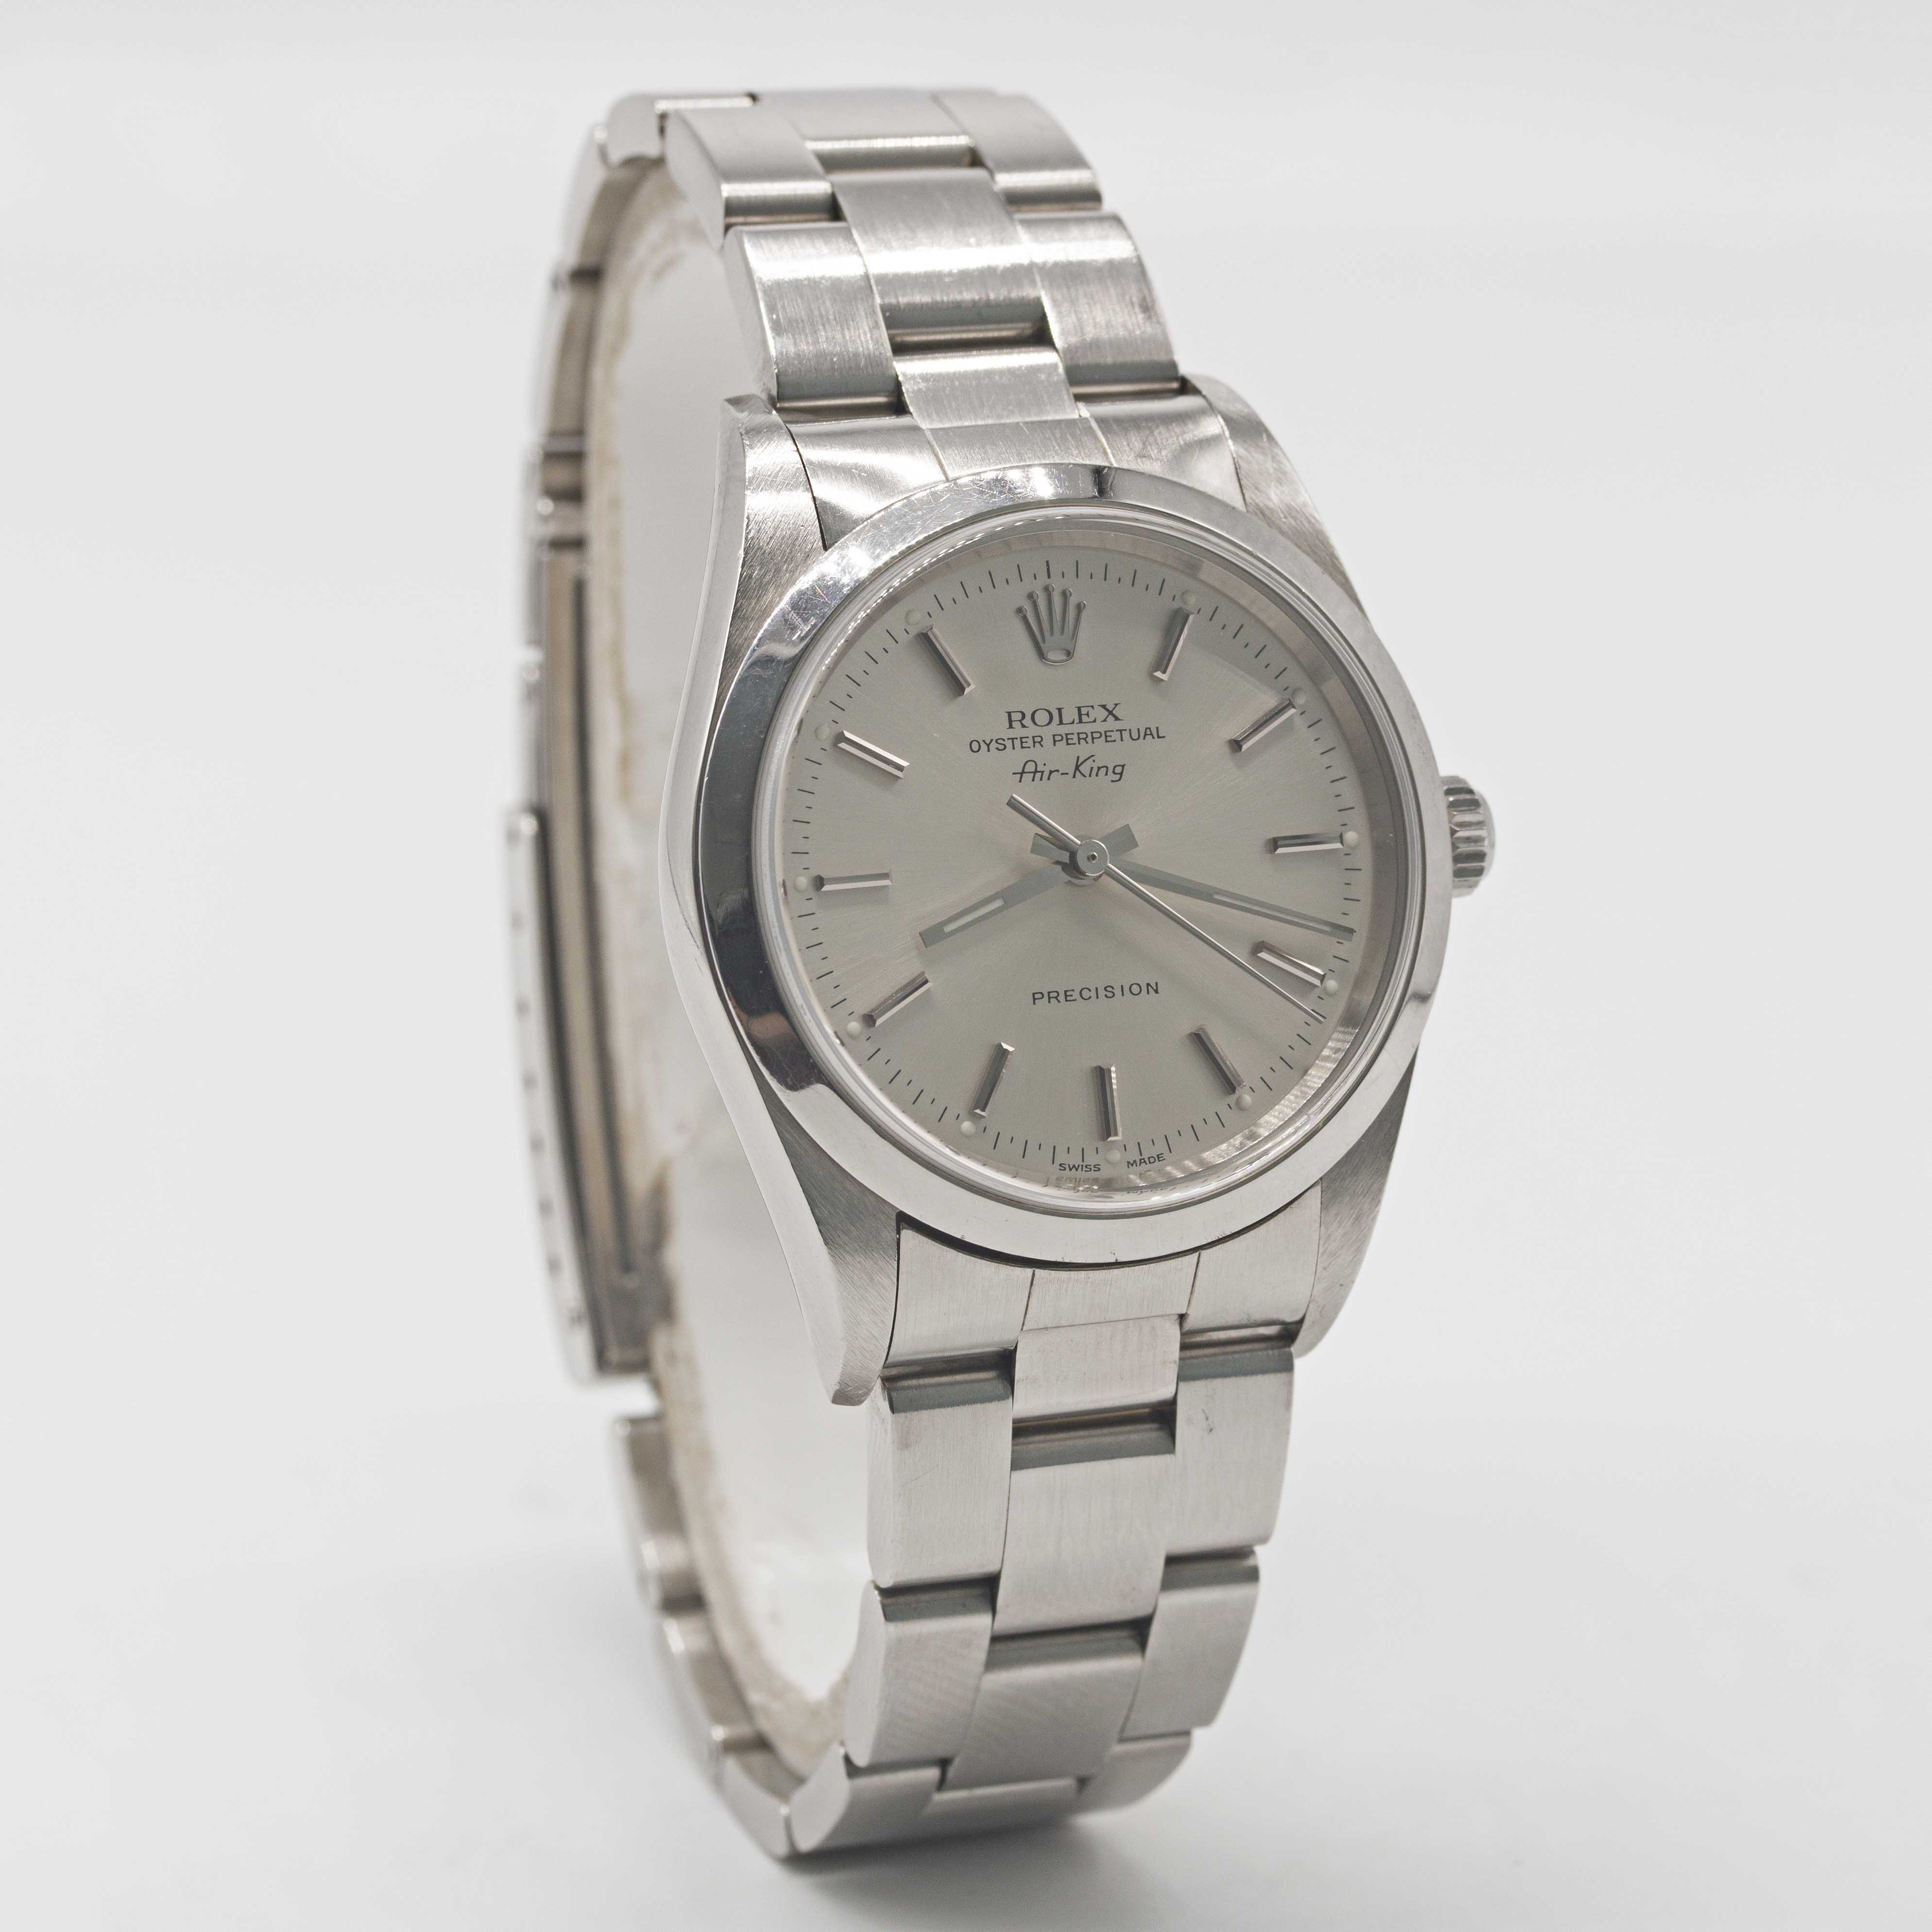 A GENTLEMAN'S STAINLESS STEEL ROLEX OYSTER PERPETUAL AIR KING PRECISION BRACELET WATCH DATED 2002, - Image 4 of 9